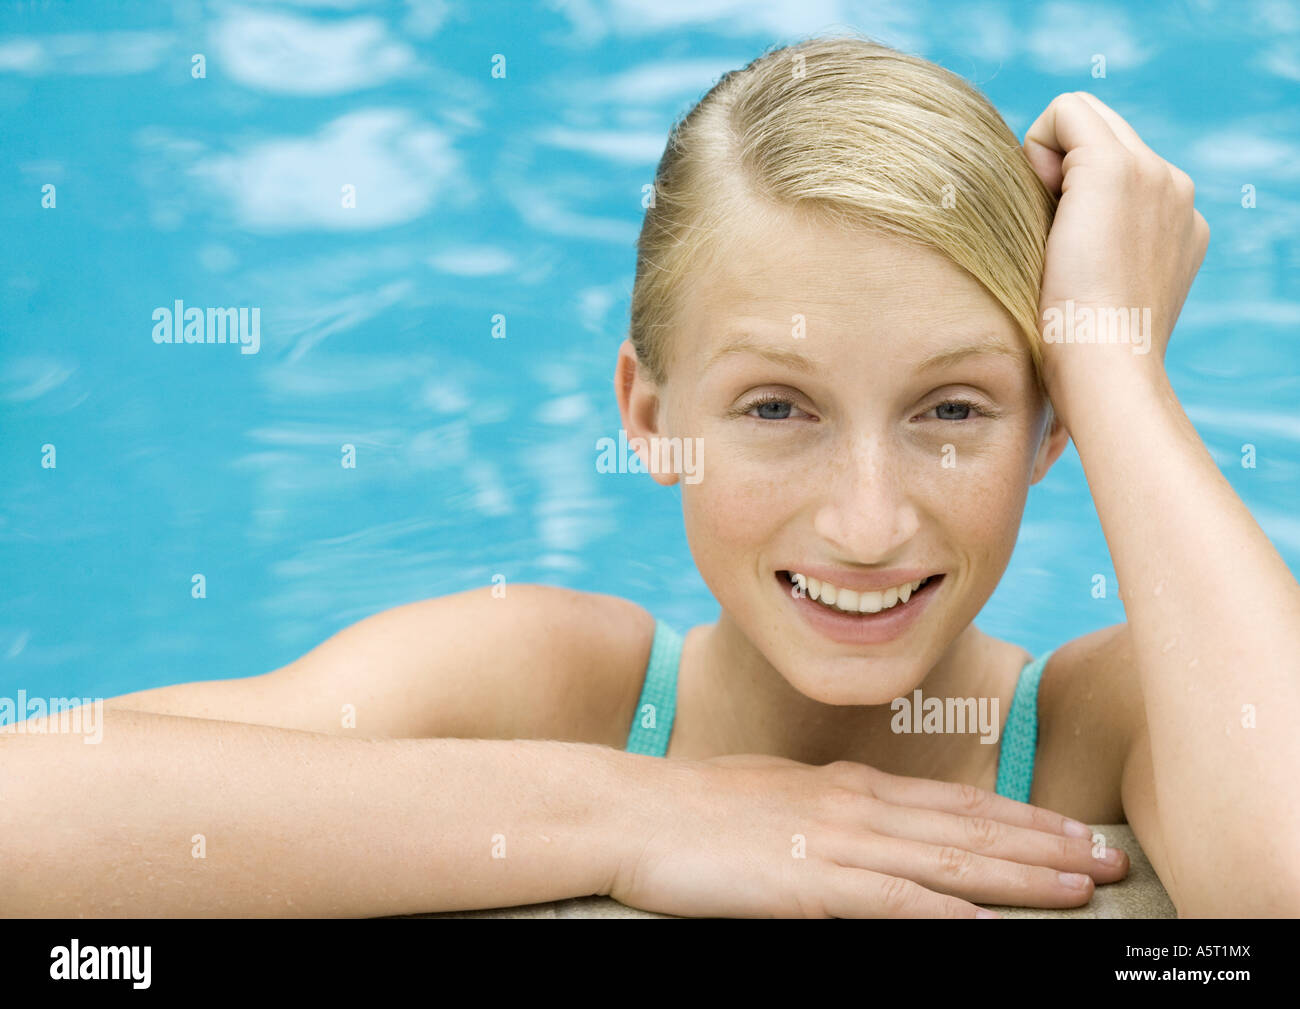 Young woman smiling, portrait, pool water in background Stock Photo